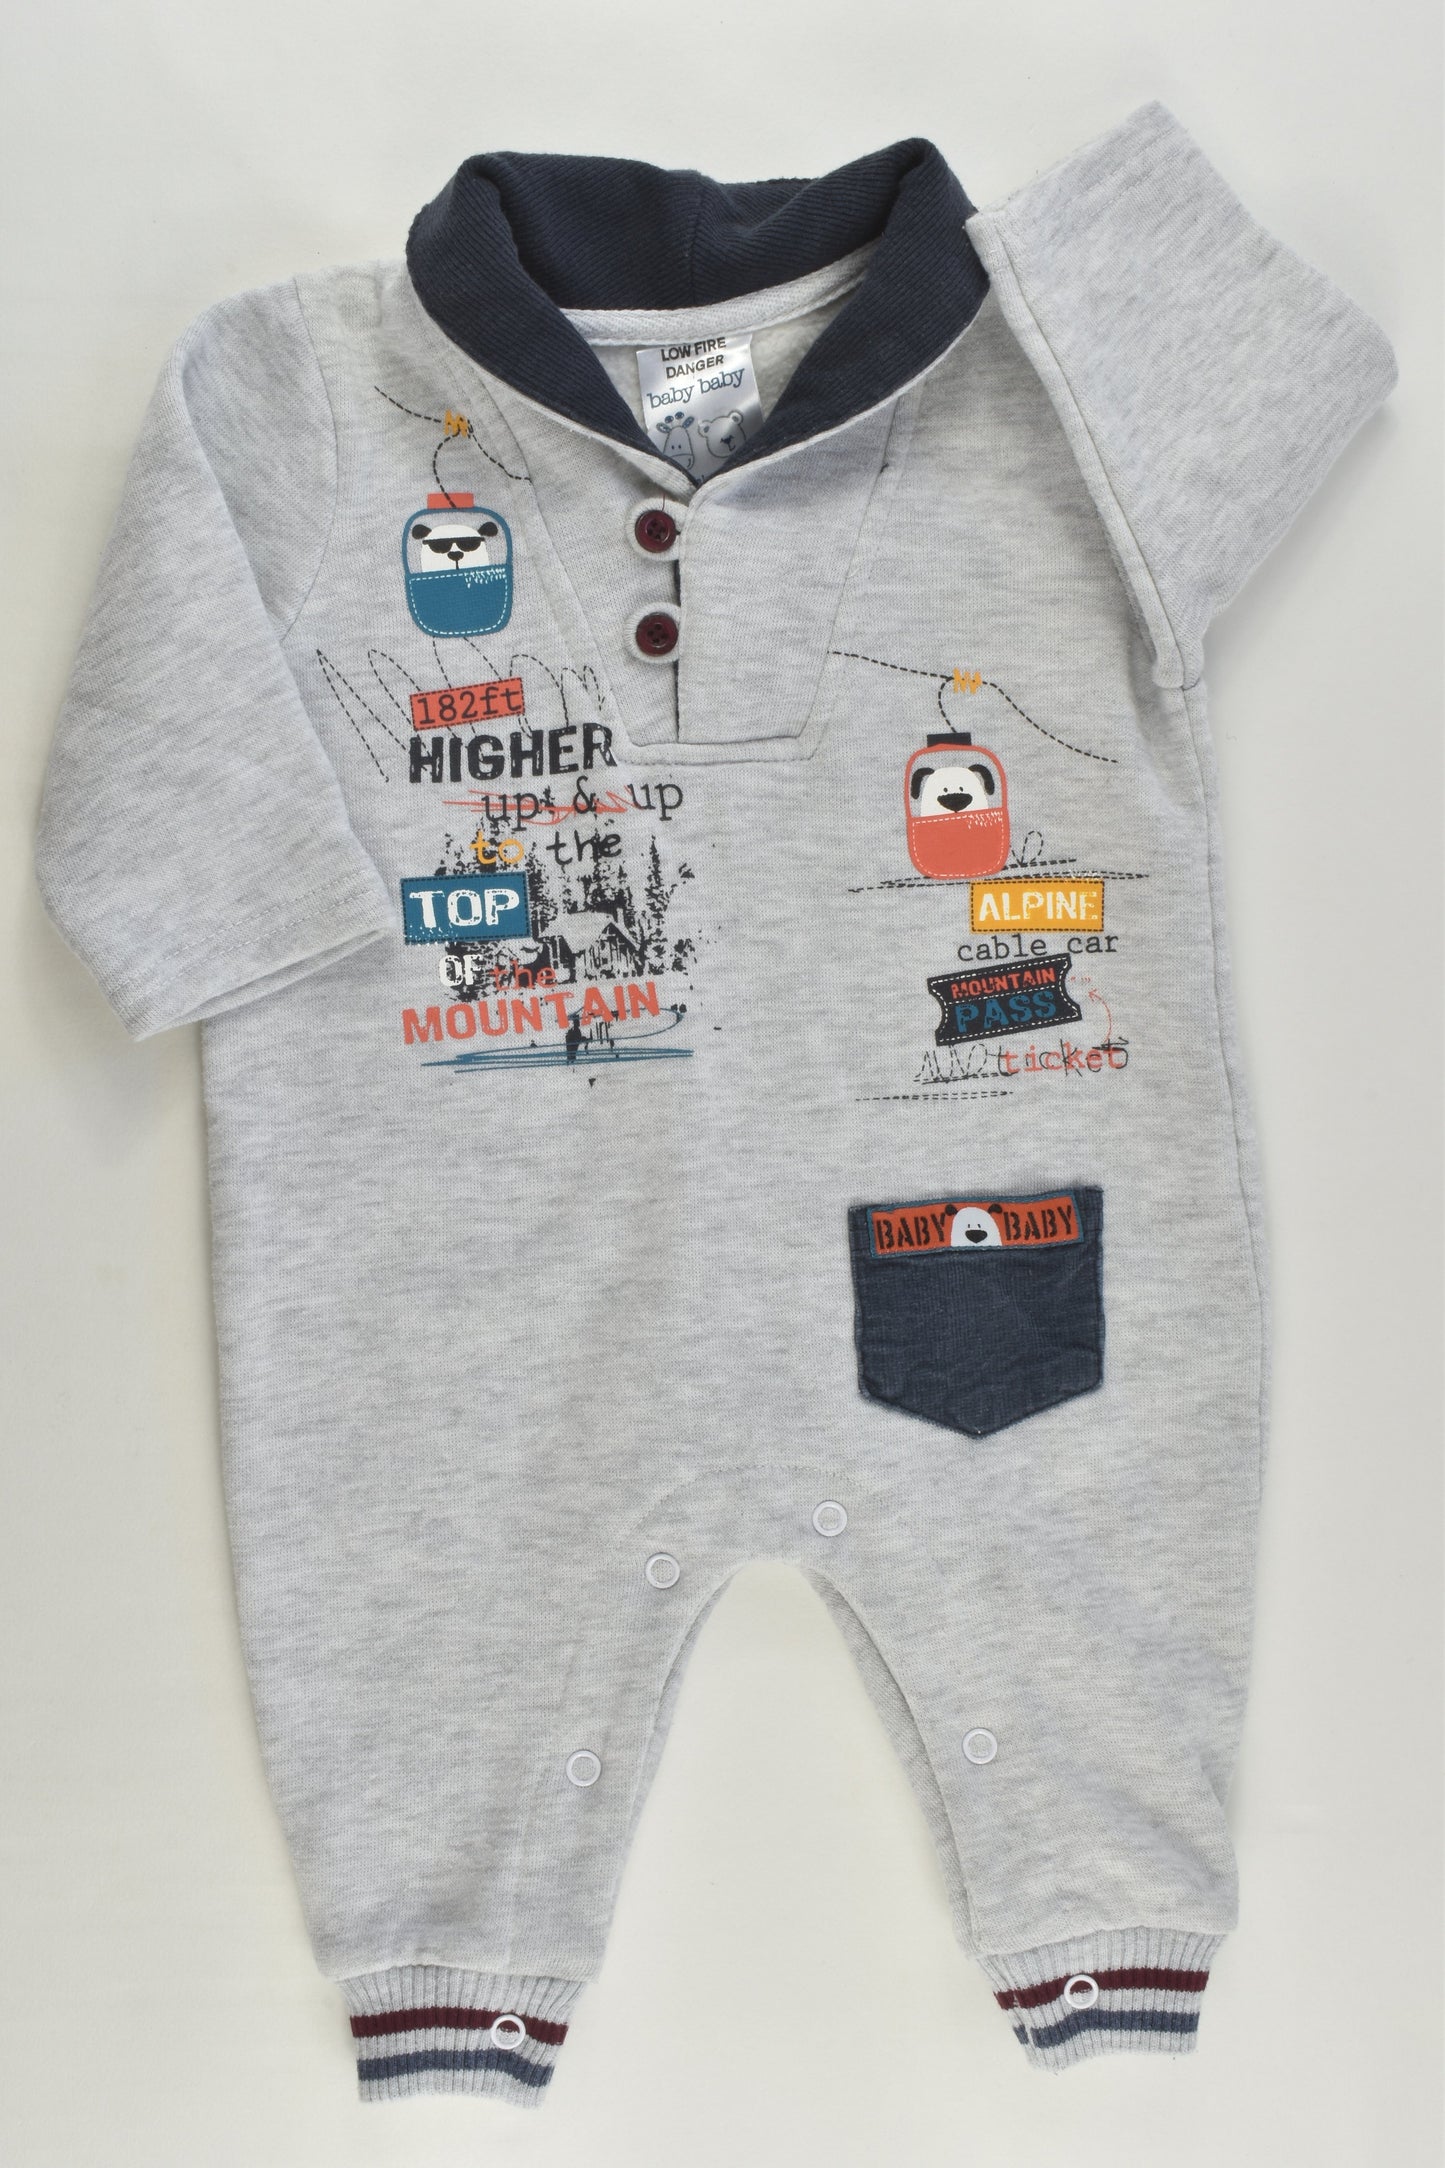 Baby Baby Size 00 'Albine Cable Car' One Piece